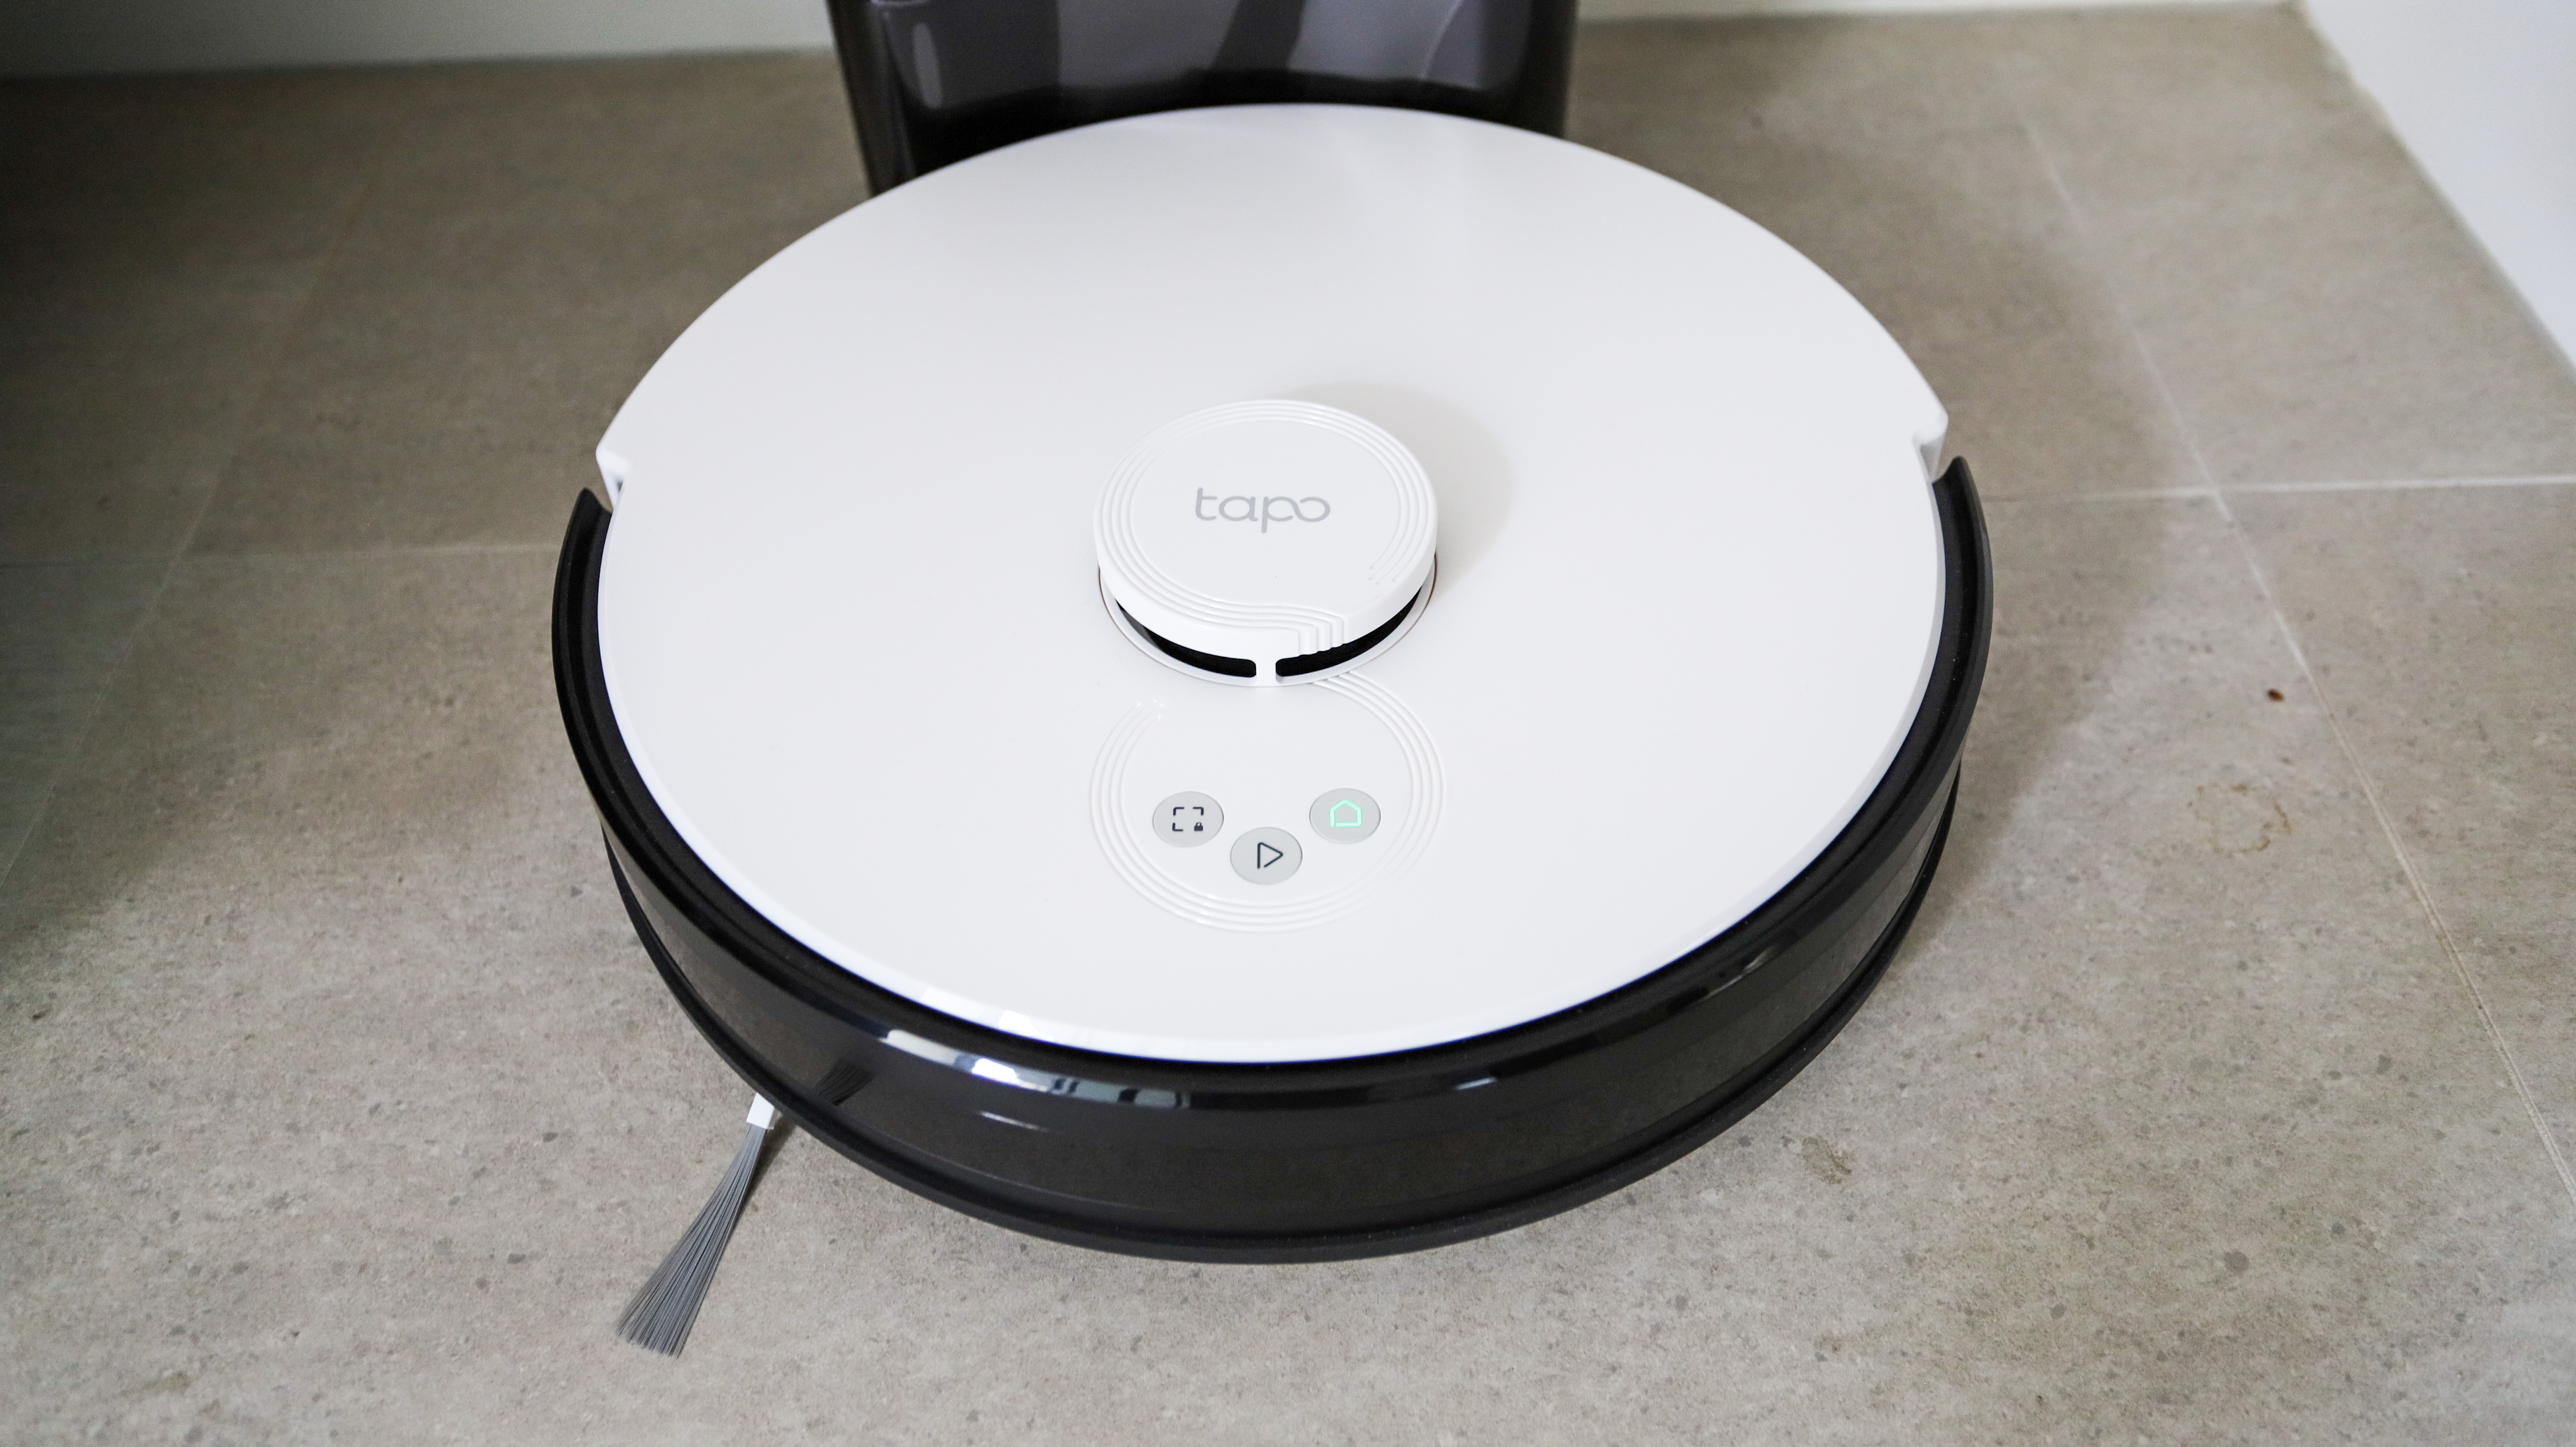 TP-Link Tapo RV30 Plus robot vacuum cleaner in its auto-empty dock